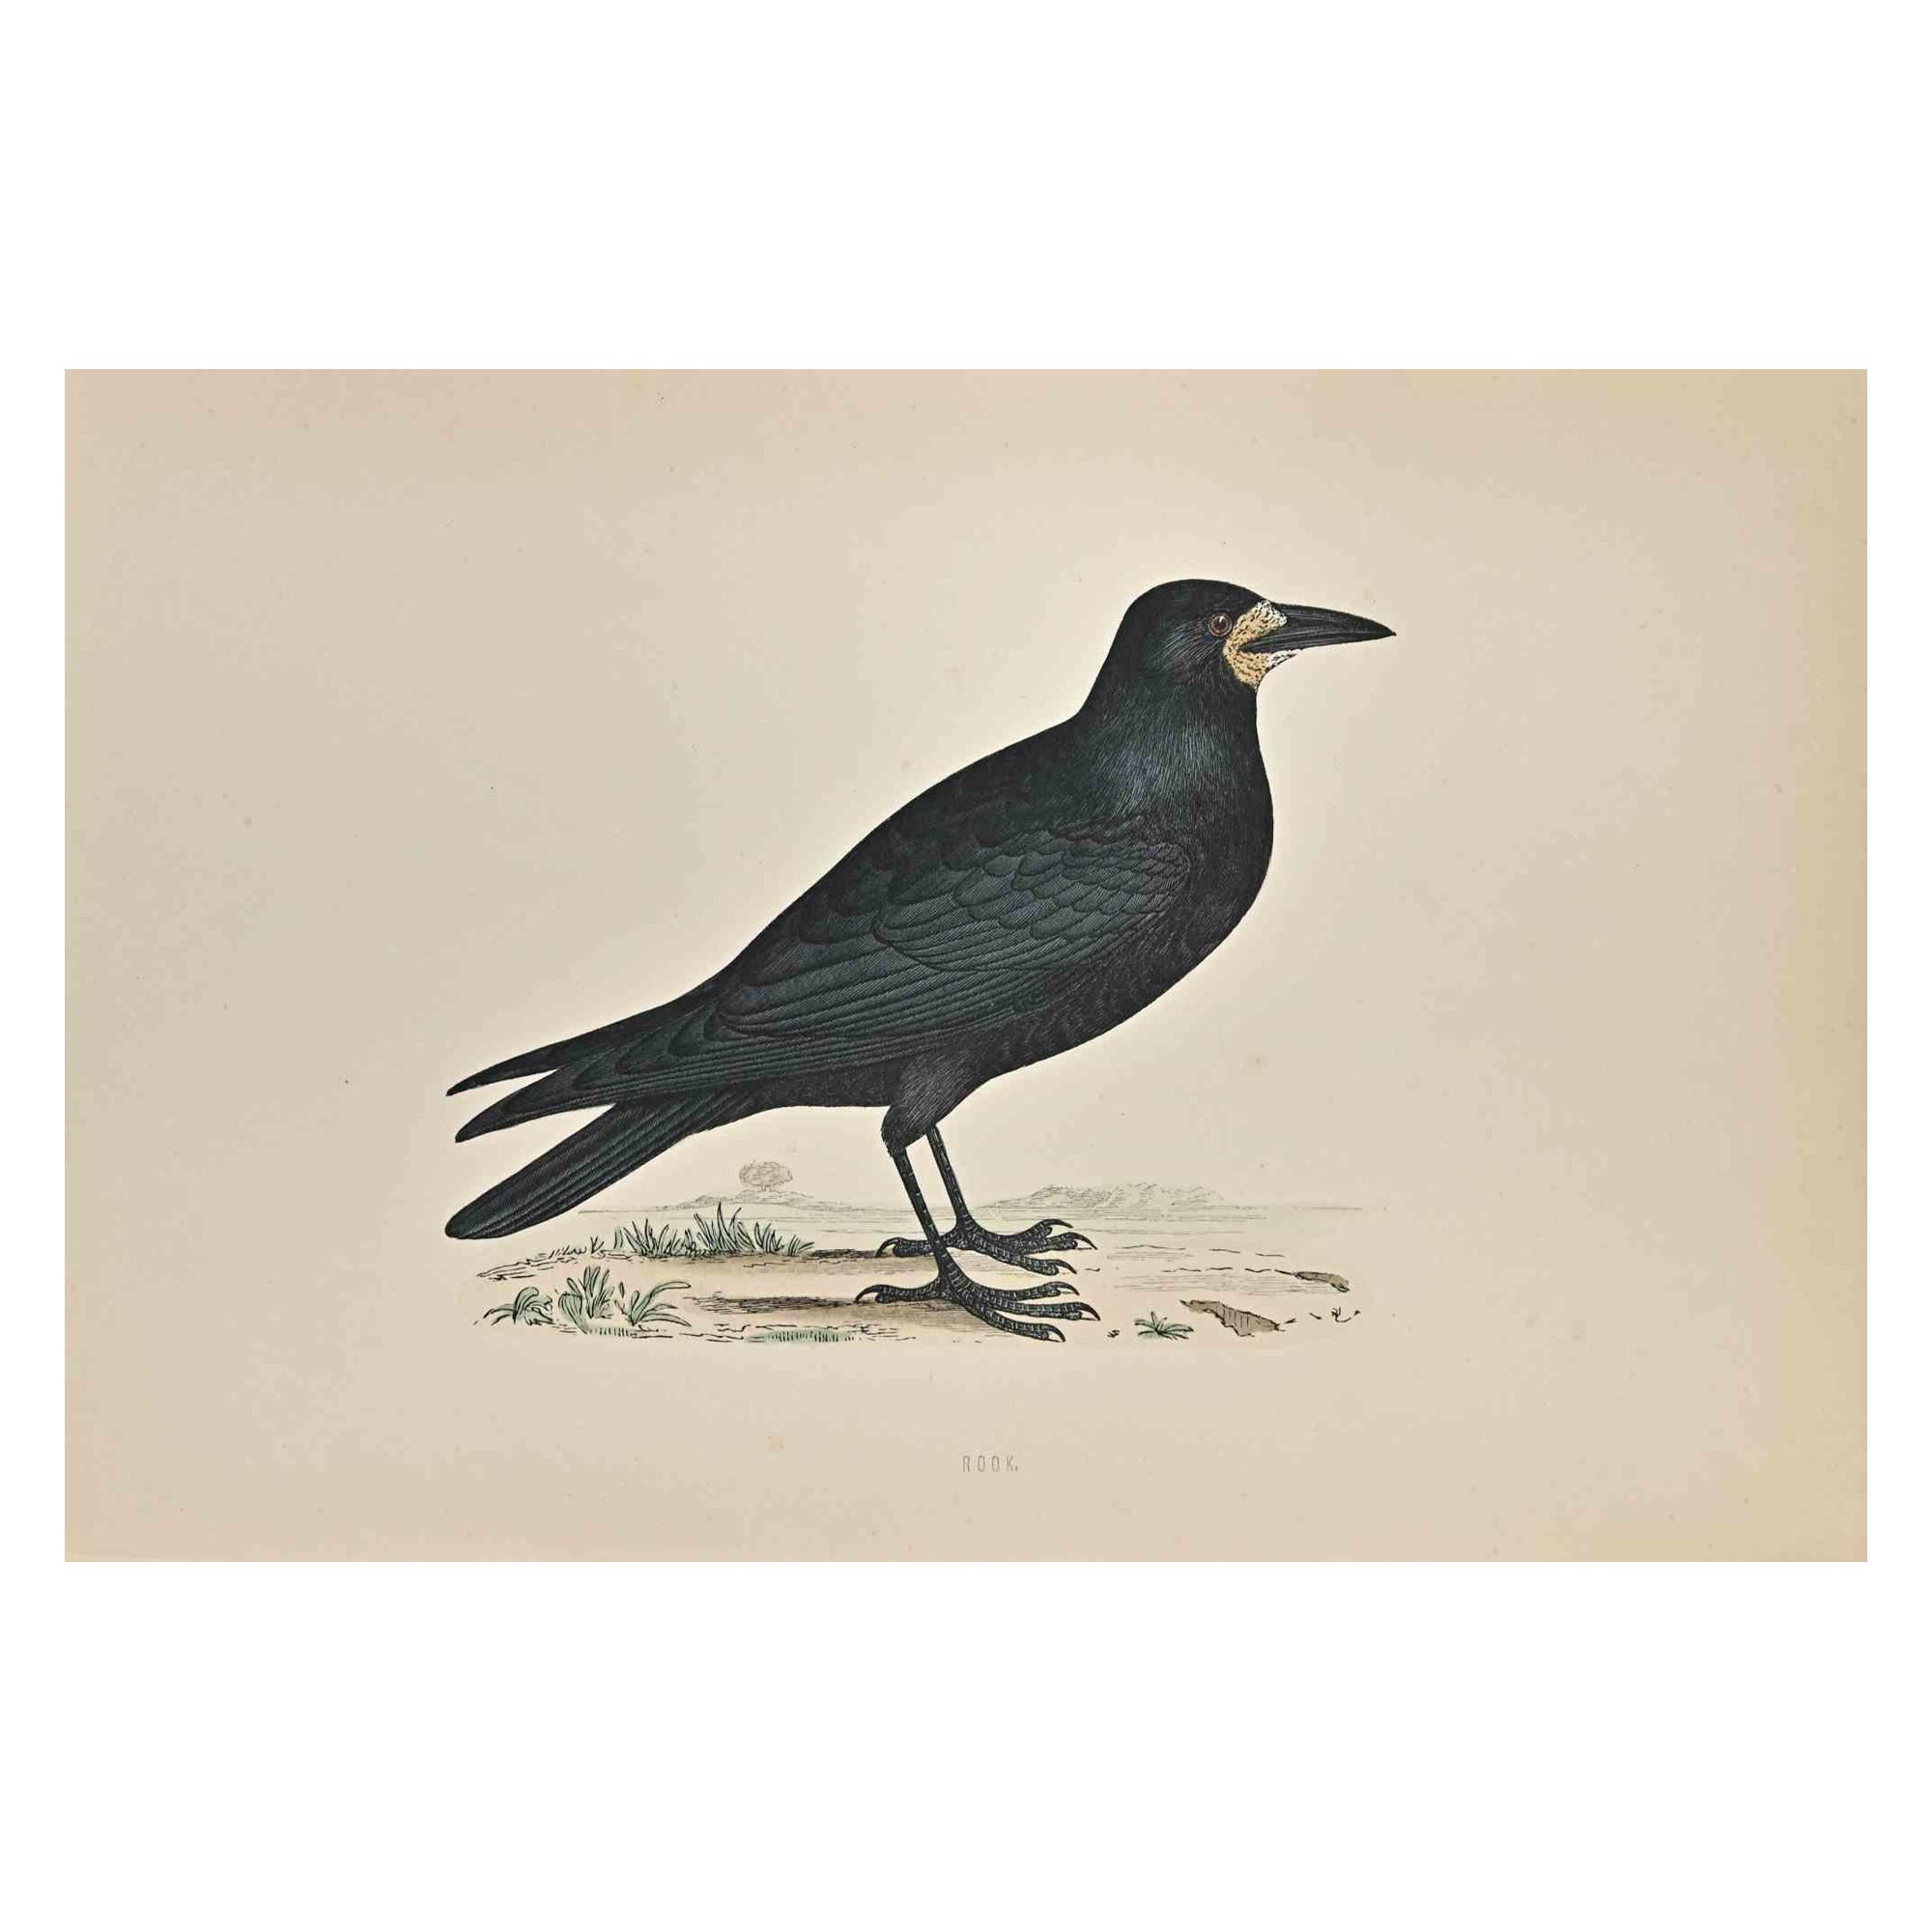  Rook is a modern artwork realized in 1870 by the British artist Alexander Francis Lydon (1836-1917) . 

Woodcut print, hand colored, published by London, Bell & Sons, 1870.  Name of the bird printed in plate. This work is part of a print suite